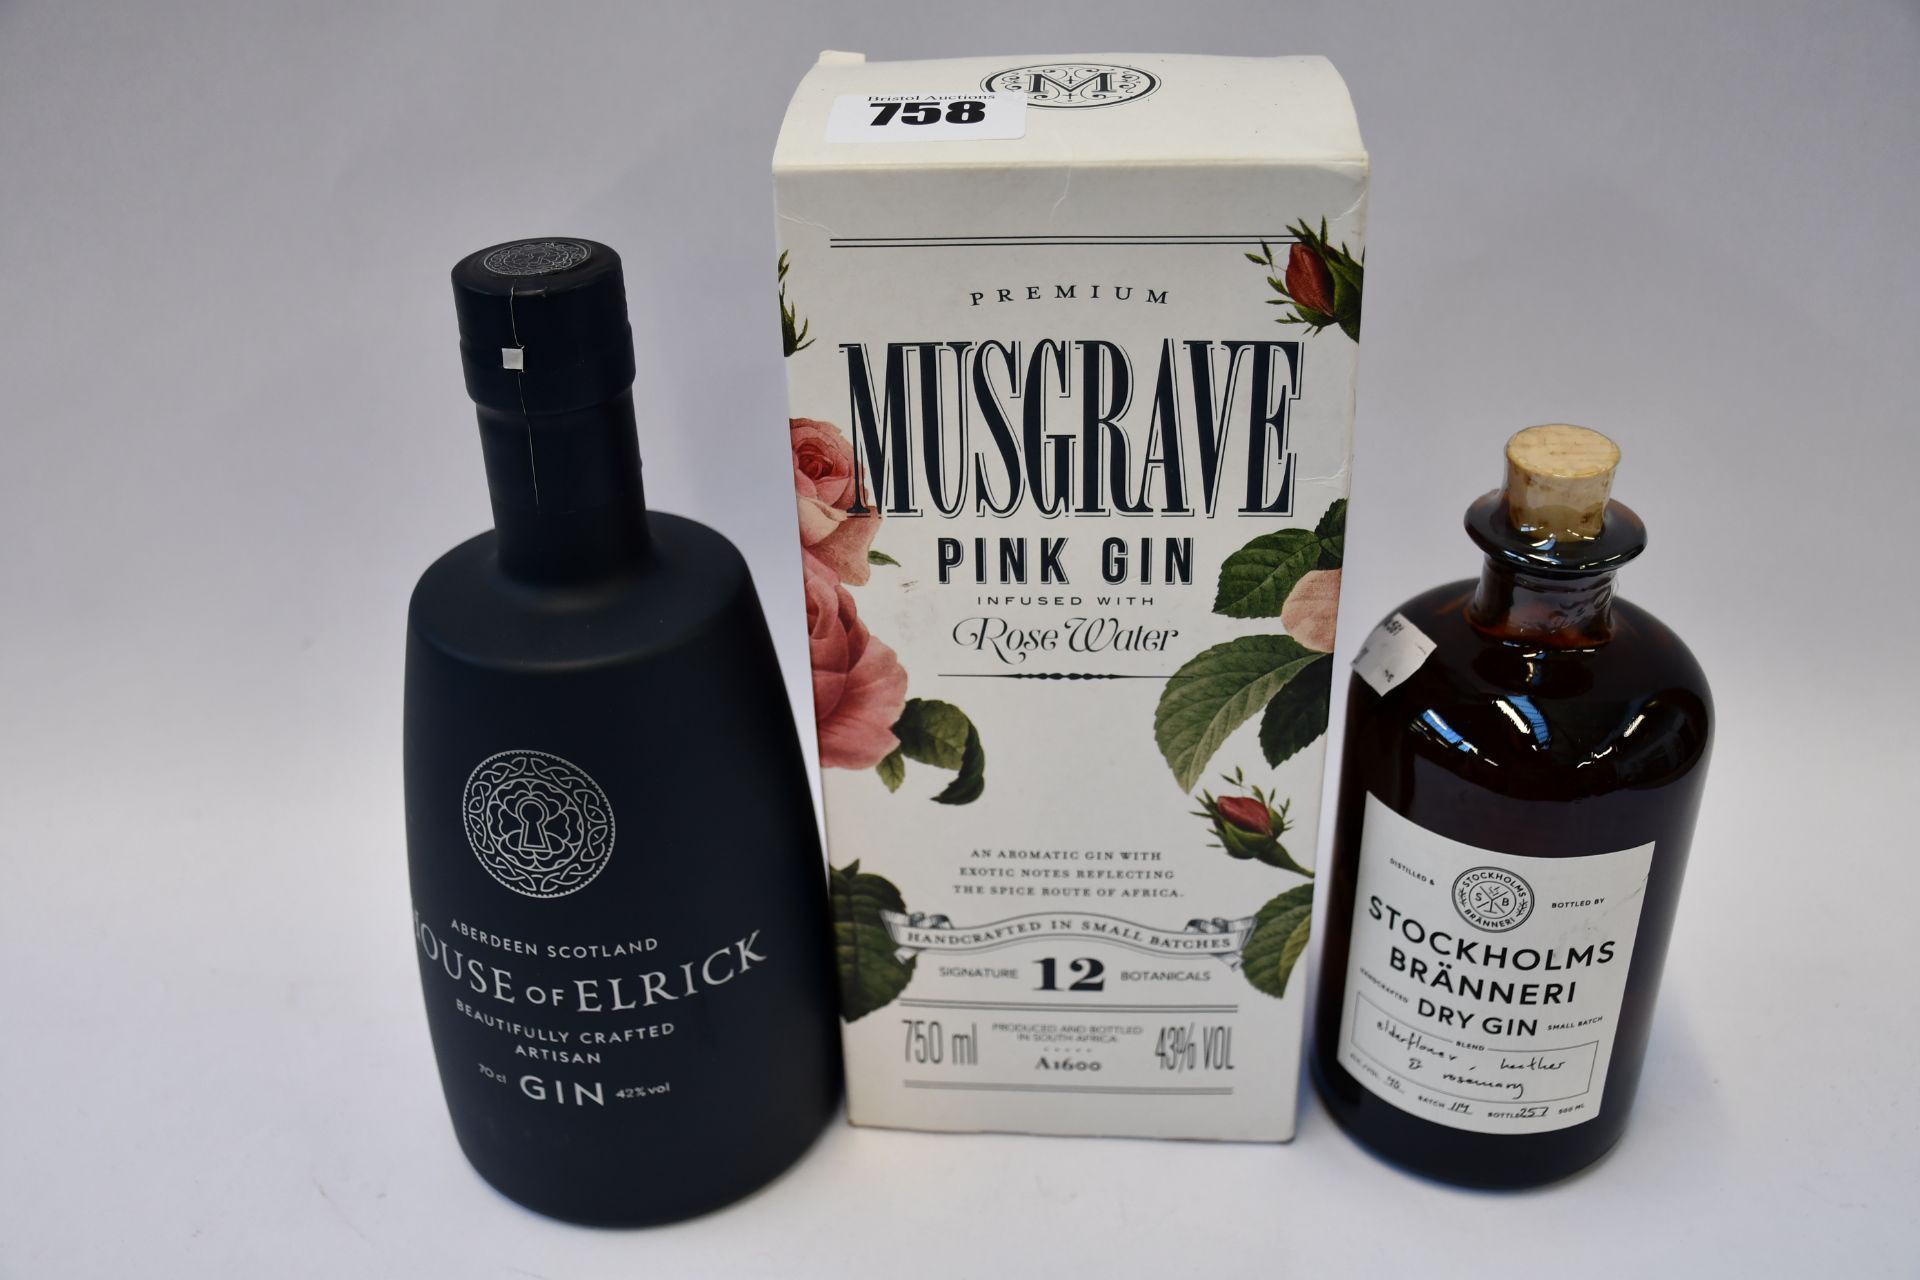 Musgrave pink gin infused with Rose water (750ml), House of Elrick Artisan gin (700ml) and